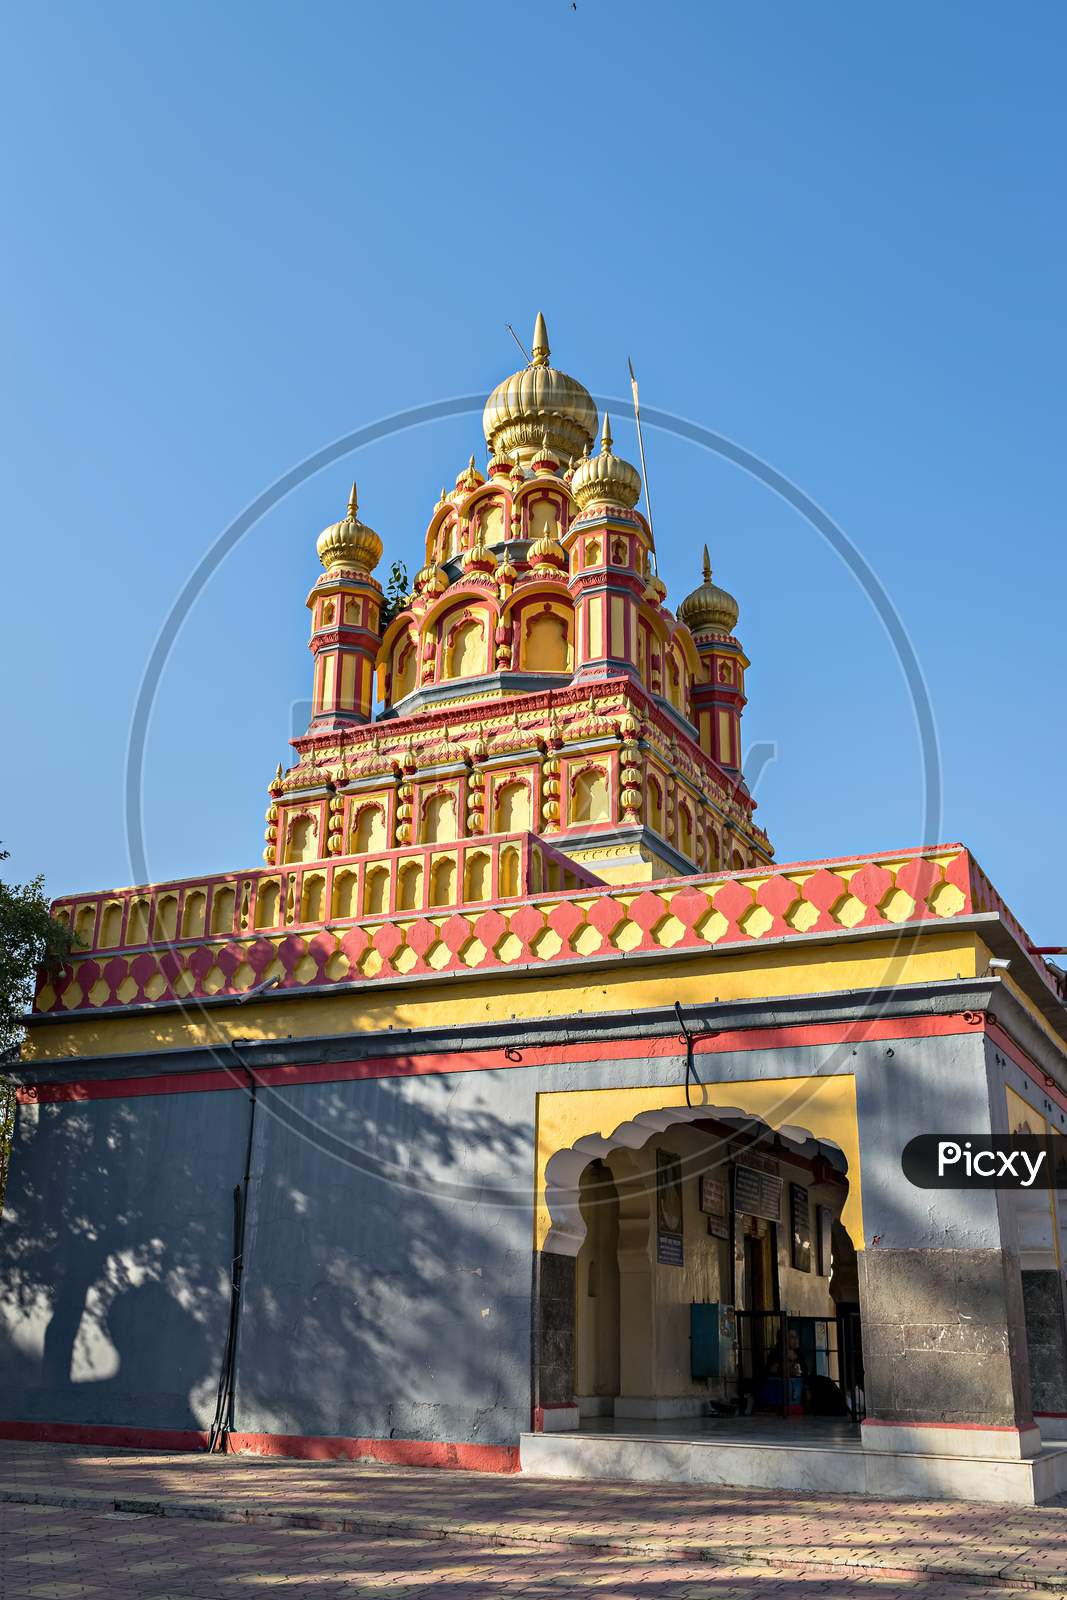 Oldest Heritage Structure In Pune-Parvati Temple On A Clear Blue Sky Background.